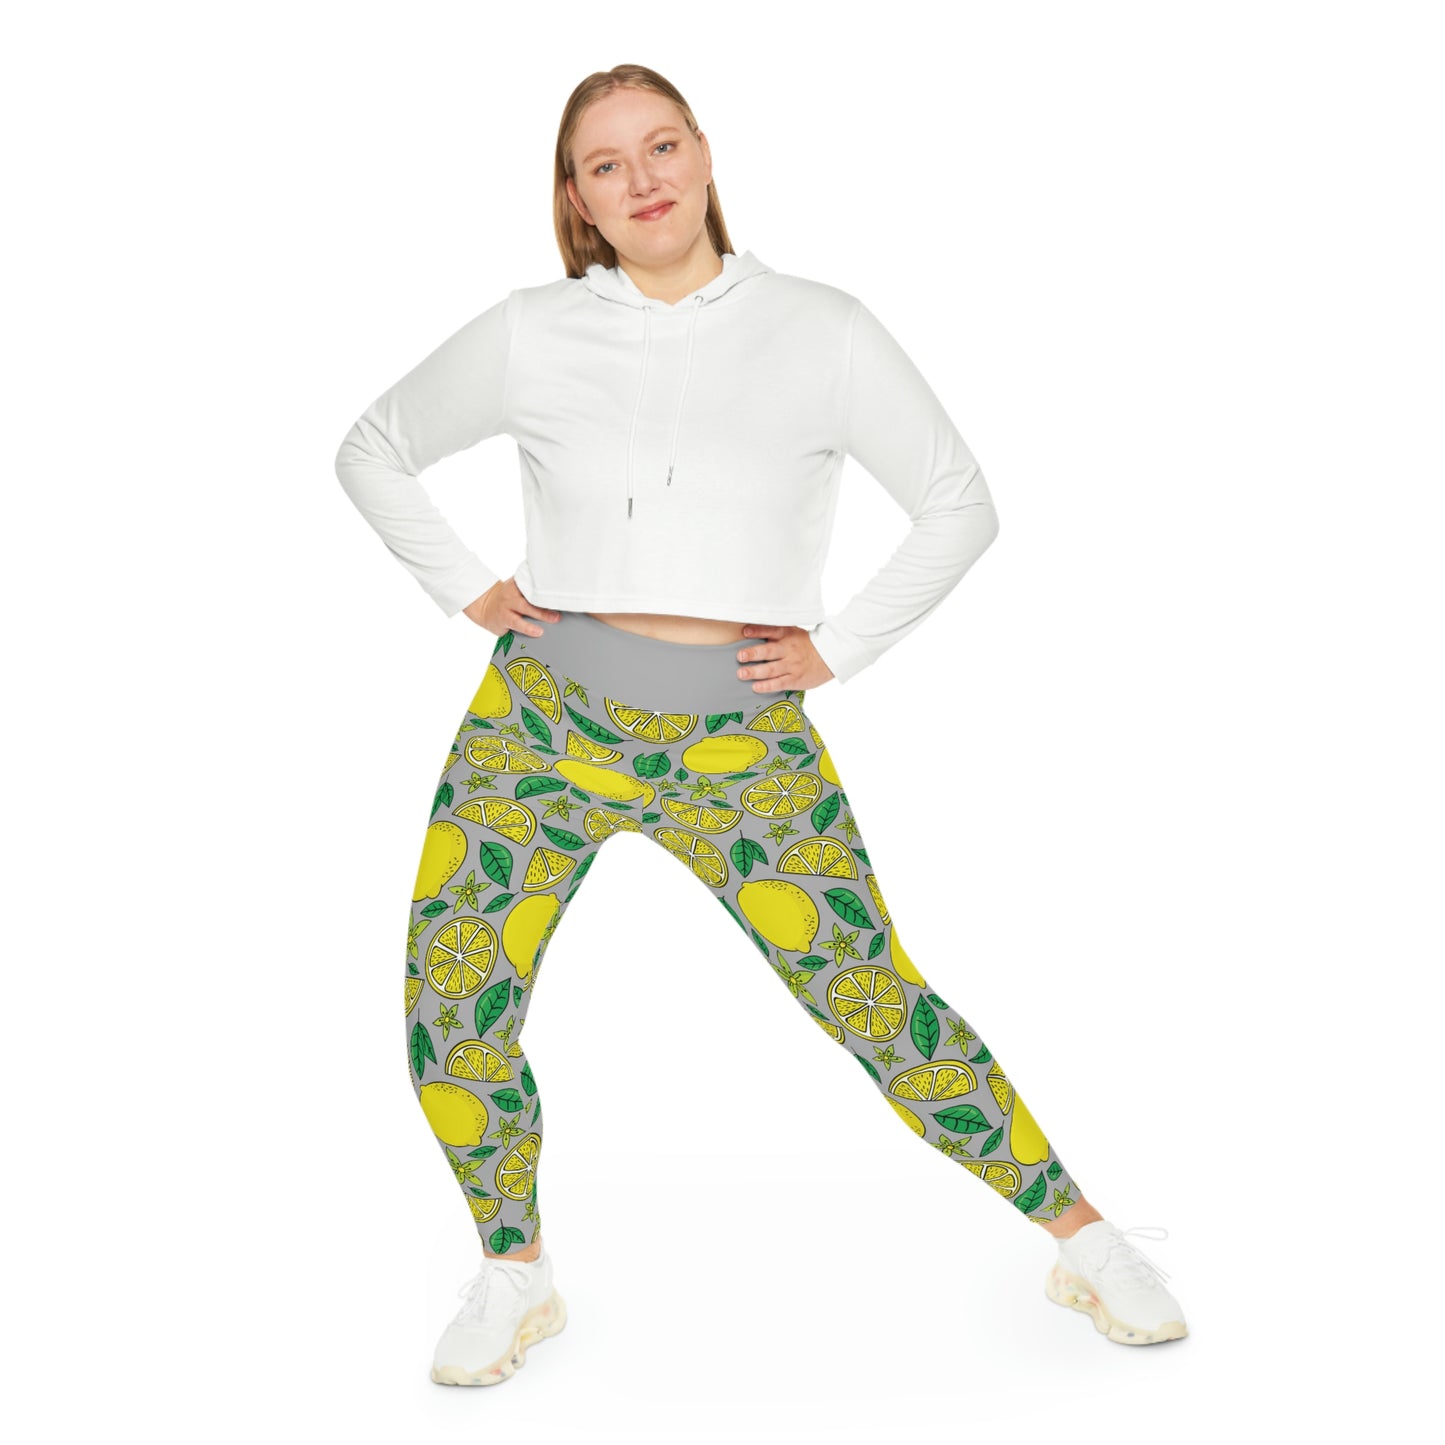 Lemon Summer Plus Size Leggings One of a Kind Gift - Unique Workout Activewear tights for Mom fitness, Mothers Day, Girlfriend Christmas Gift